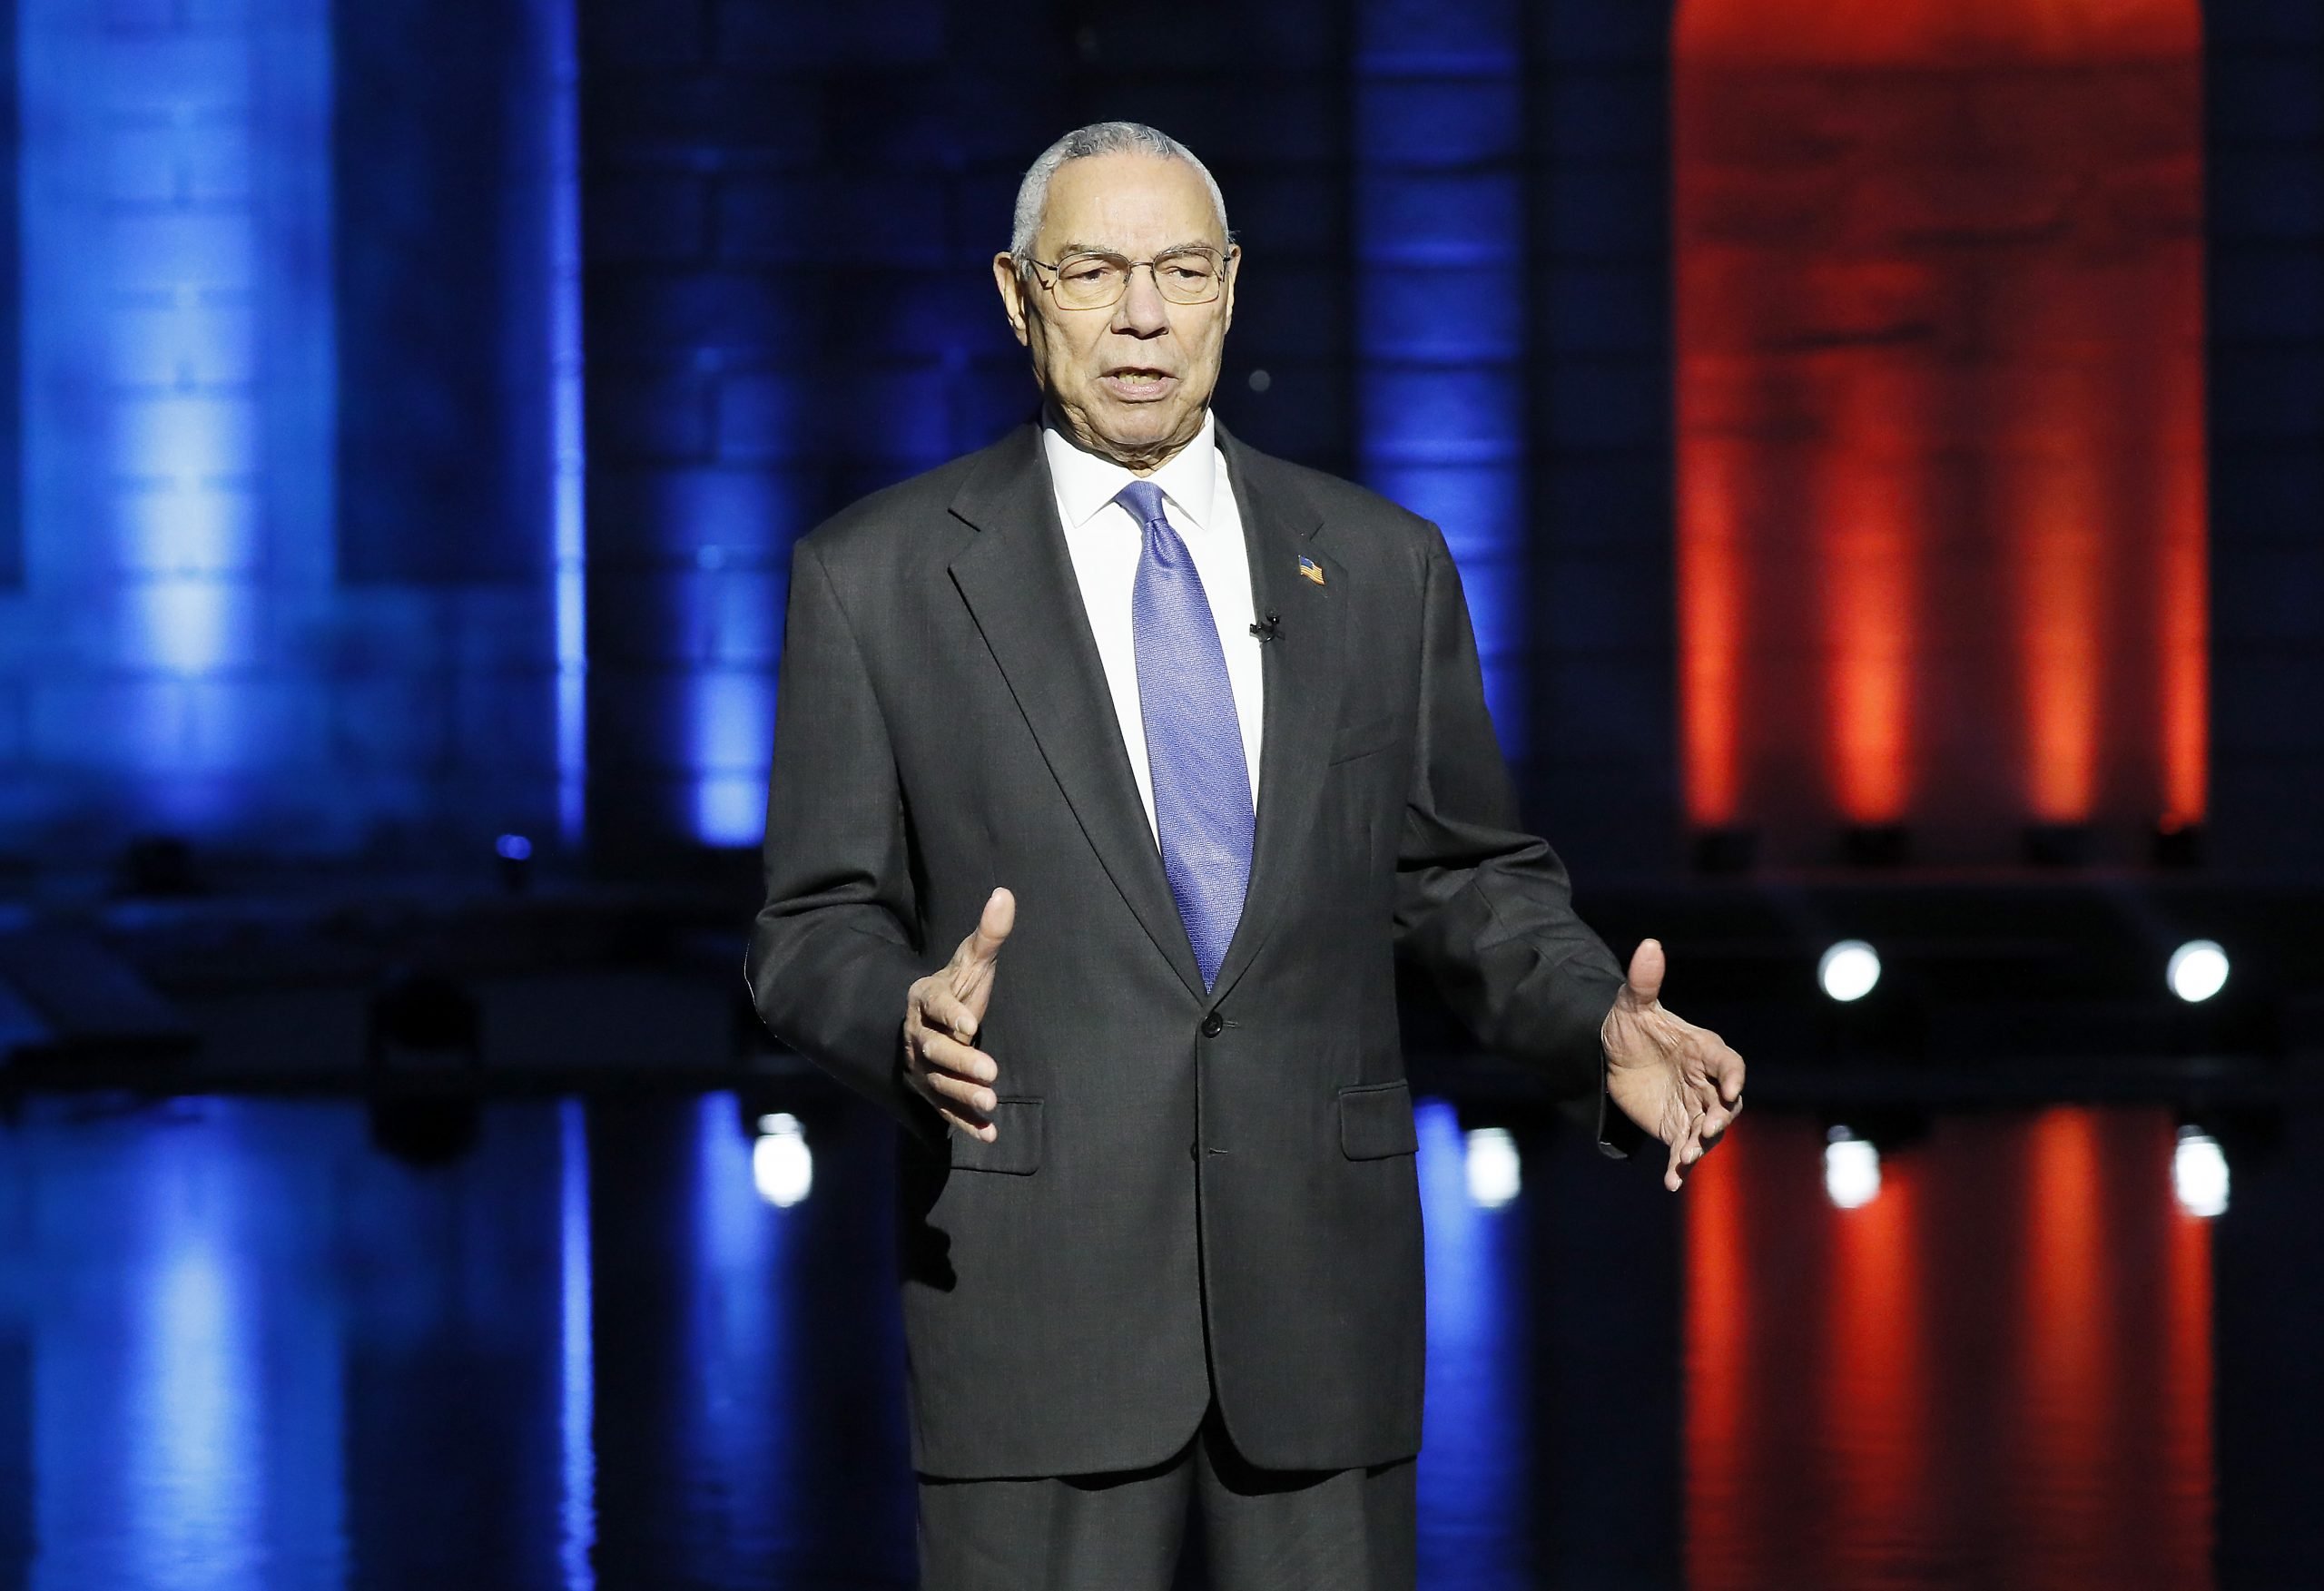 Retired General Colin Powell Gen. Colin Powell (Ret.) on stage during the Capital Concerts' "National Memorial Day Concert" in Washington, DC. The National Memorial Day Concert will be broadcast on May 30, 2021